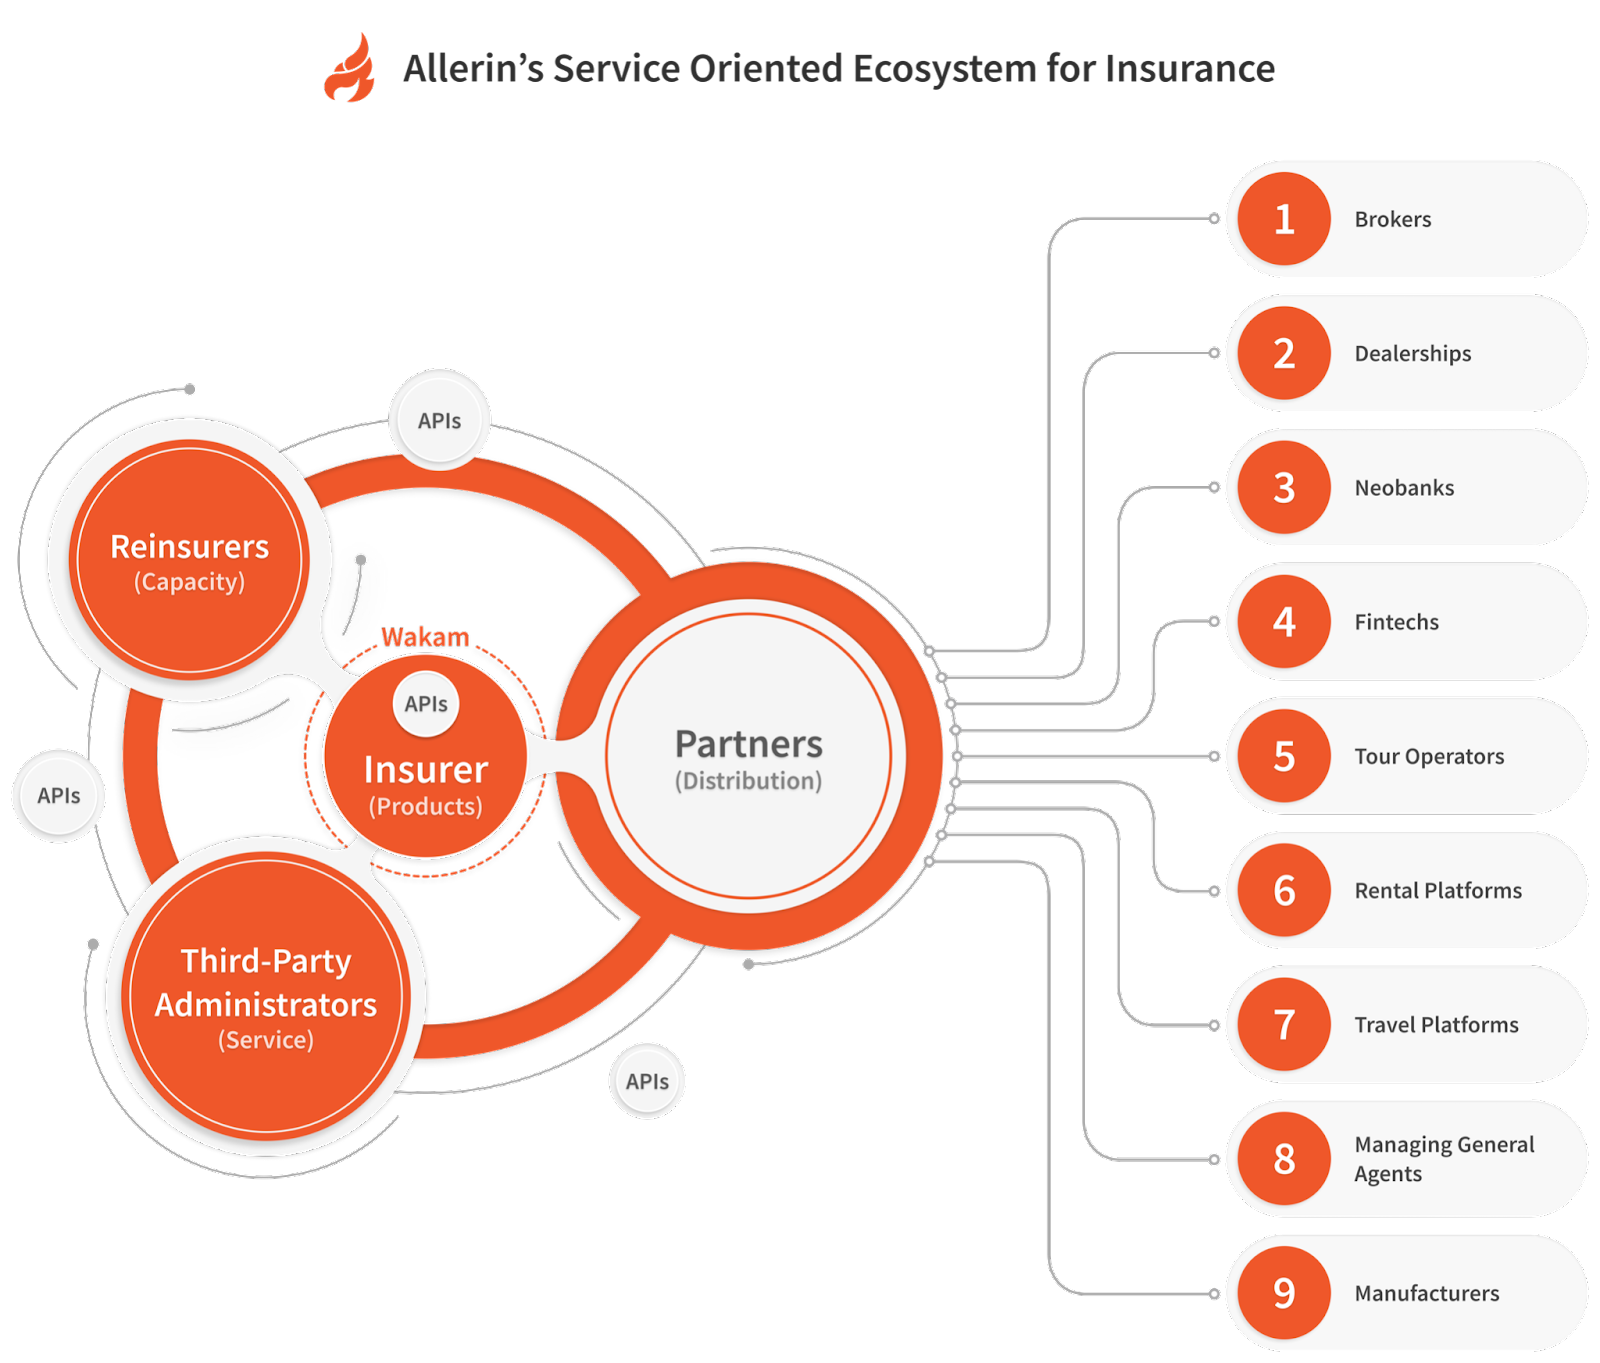 Service Oriented Ecosystem for Insurance